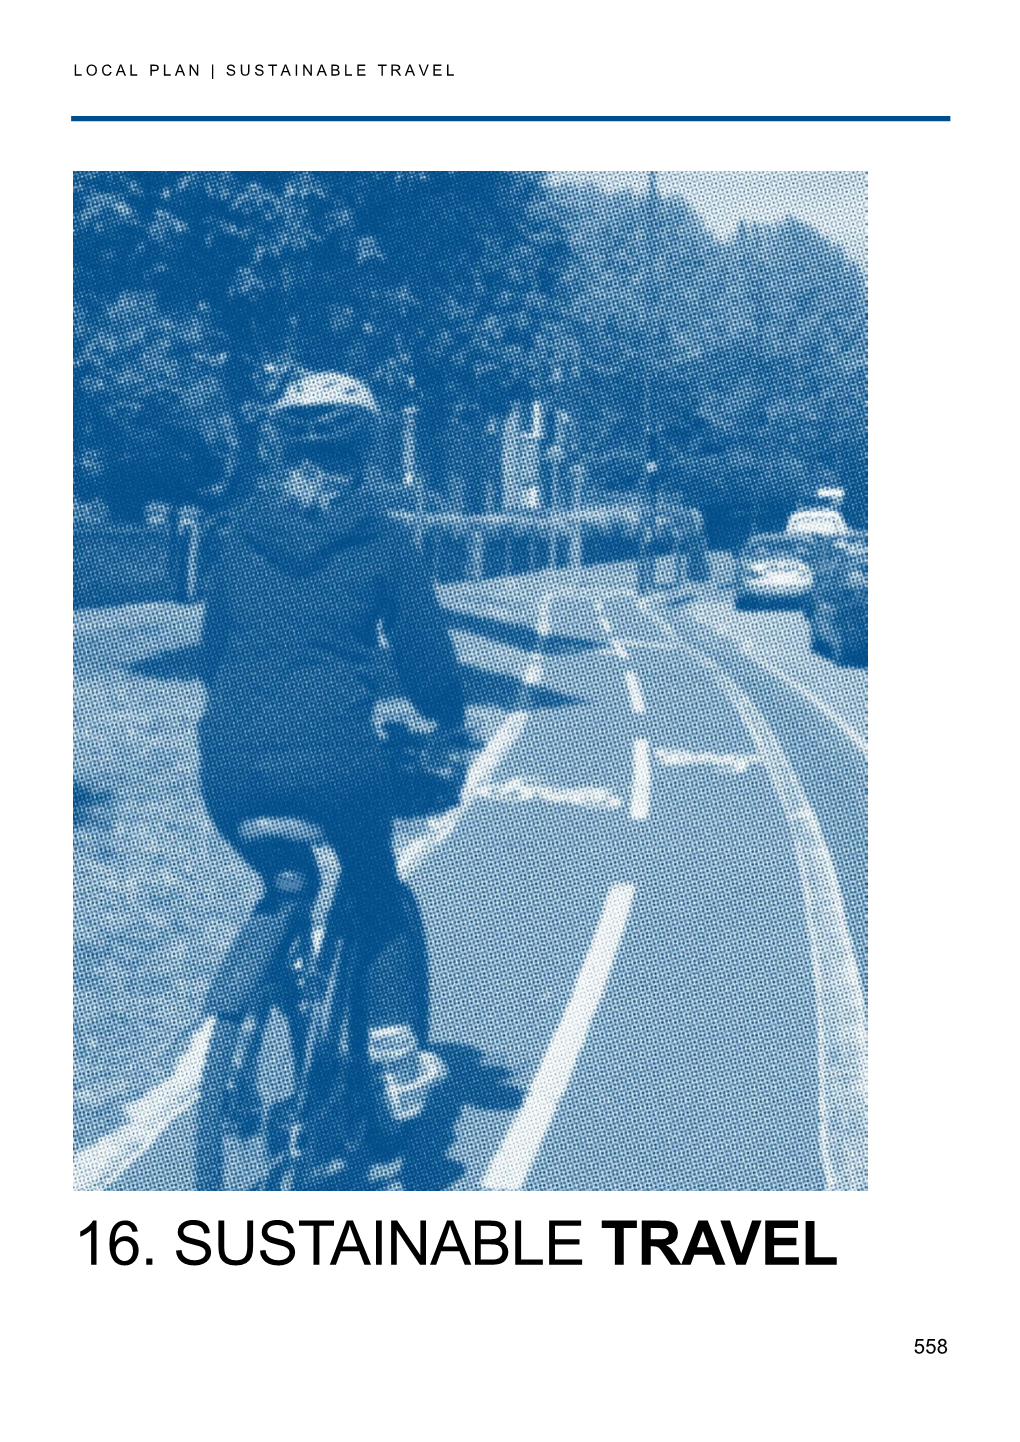 New Local Plan Stage 3: Transport and Urban Mobility